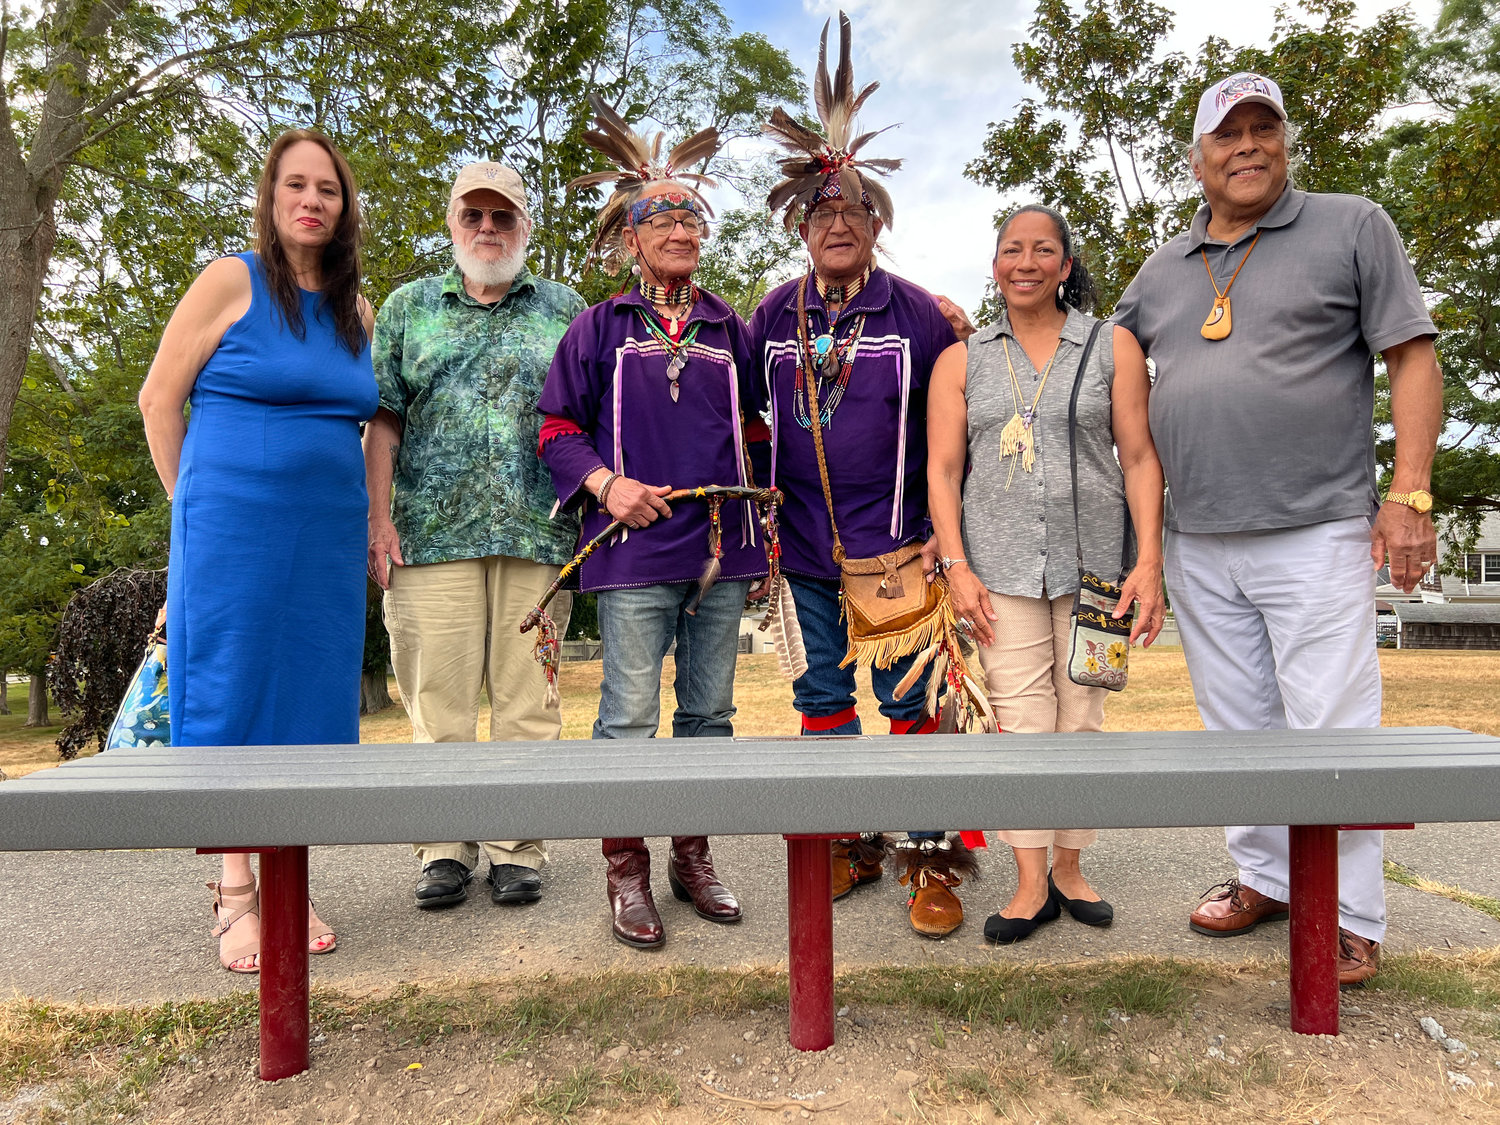 Nancy Wildes, Governor of Mayflower Descendants of RI, Ray Battcher historian for the Mayflower Descendants, Lee "Braveheart" Edmonds, Harry "Hawk" Edmonds, Sachem Dancing Star and Sagamore Po Wauipi Neimpaug pose with the new bench that was donated to them by the Mayflower Descendents of RI.